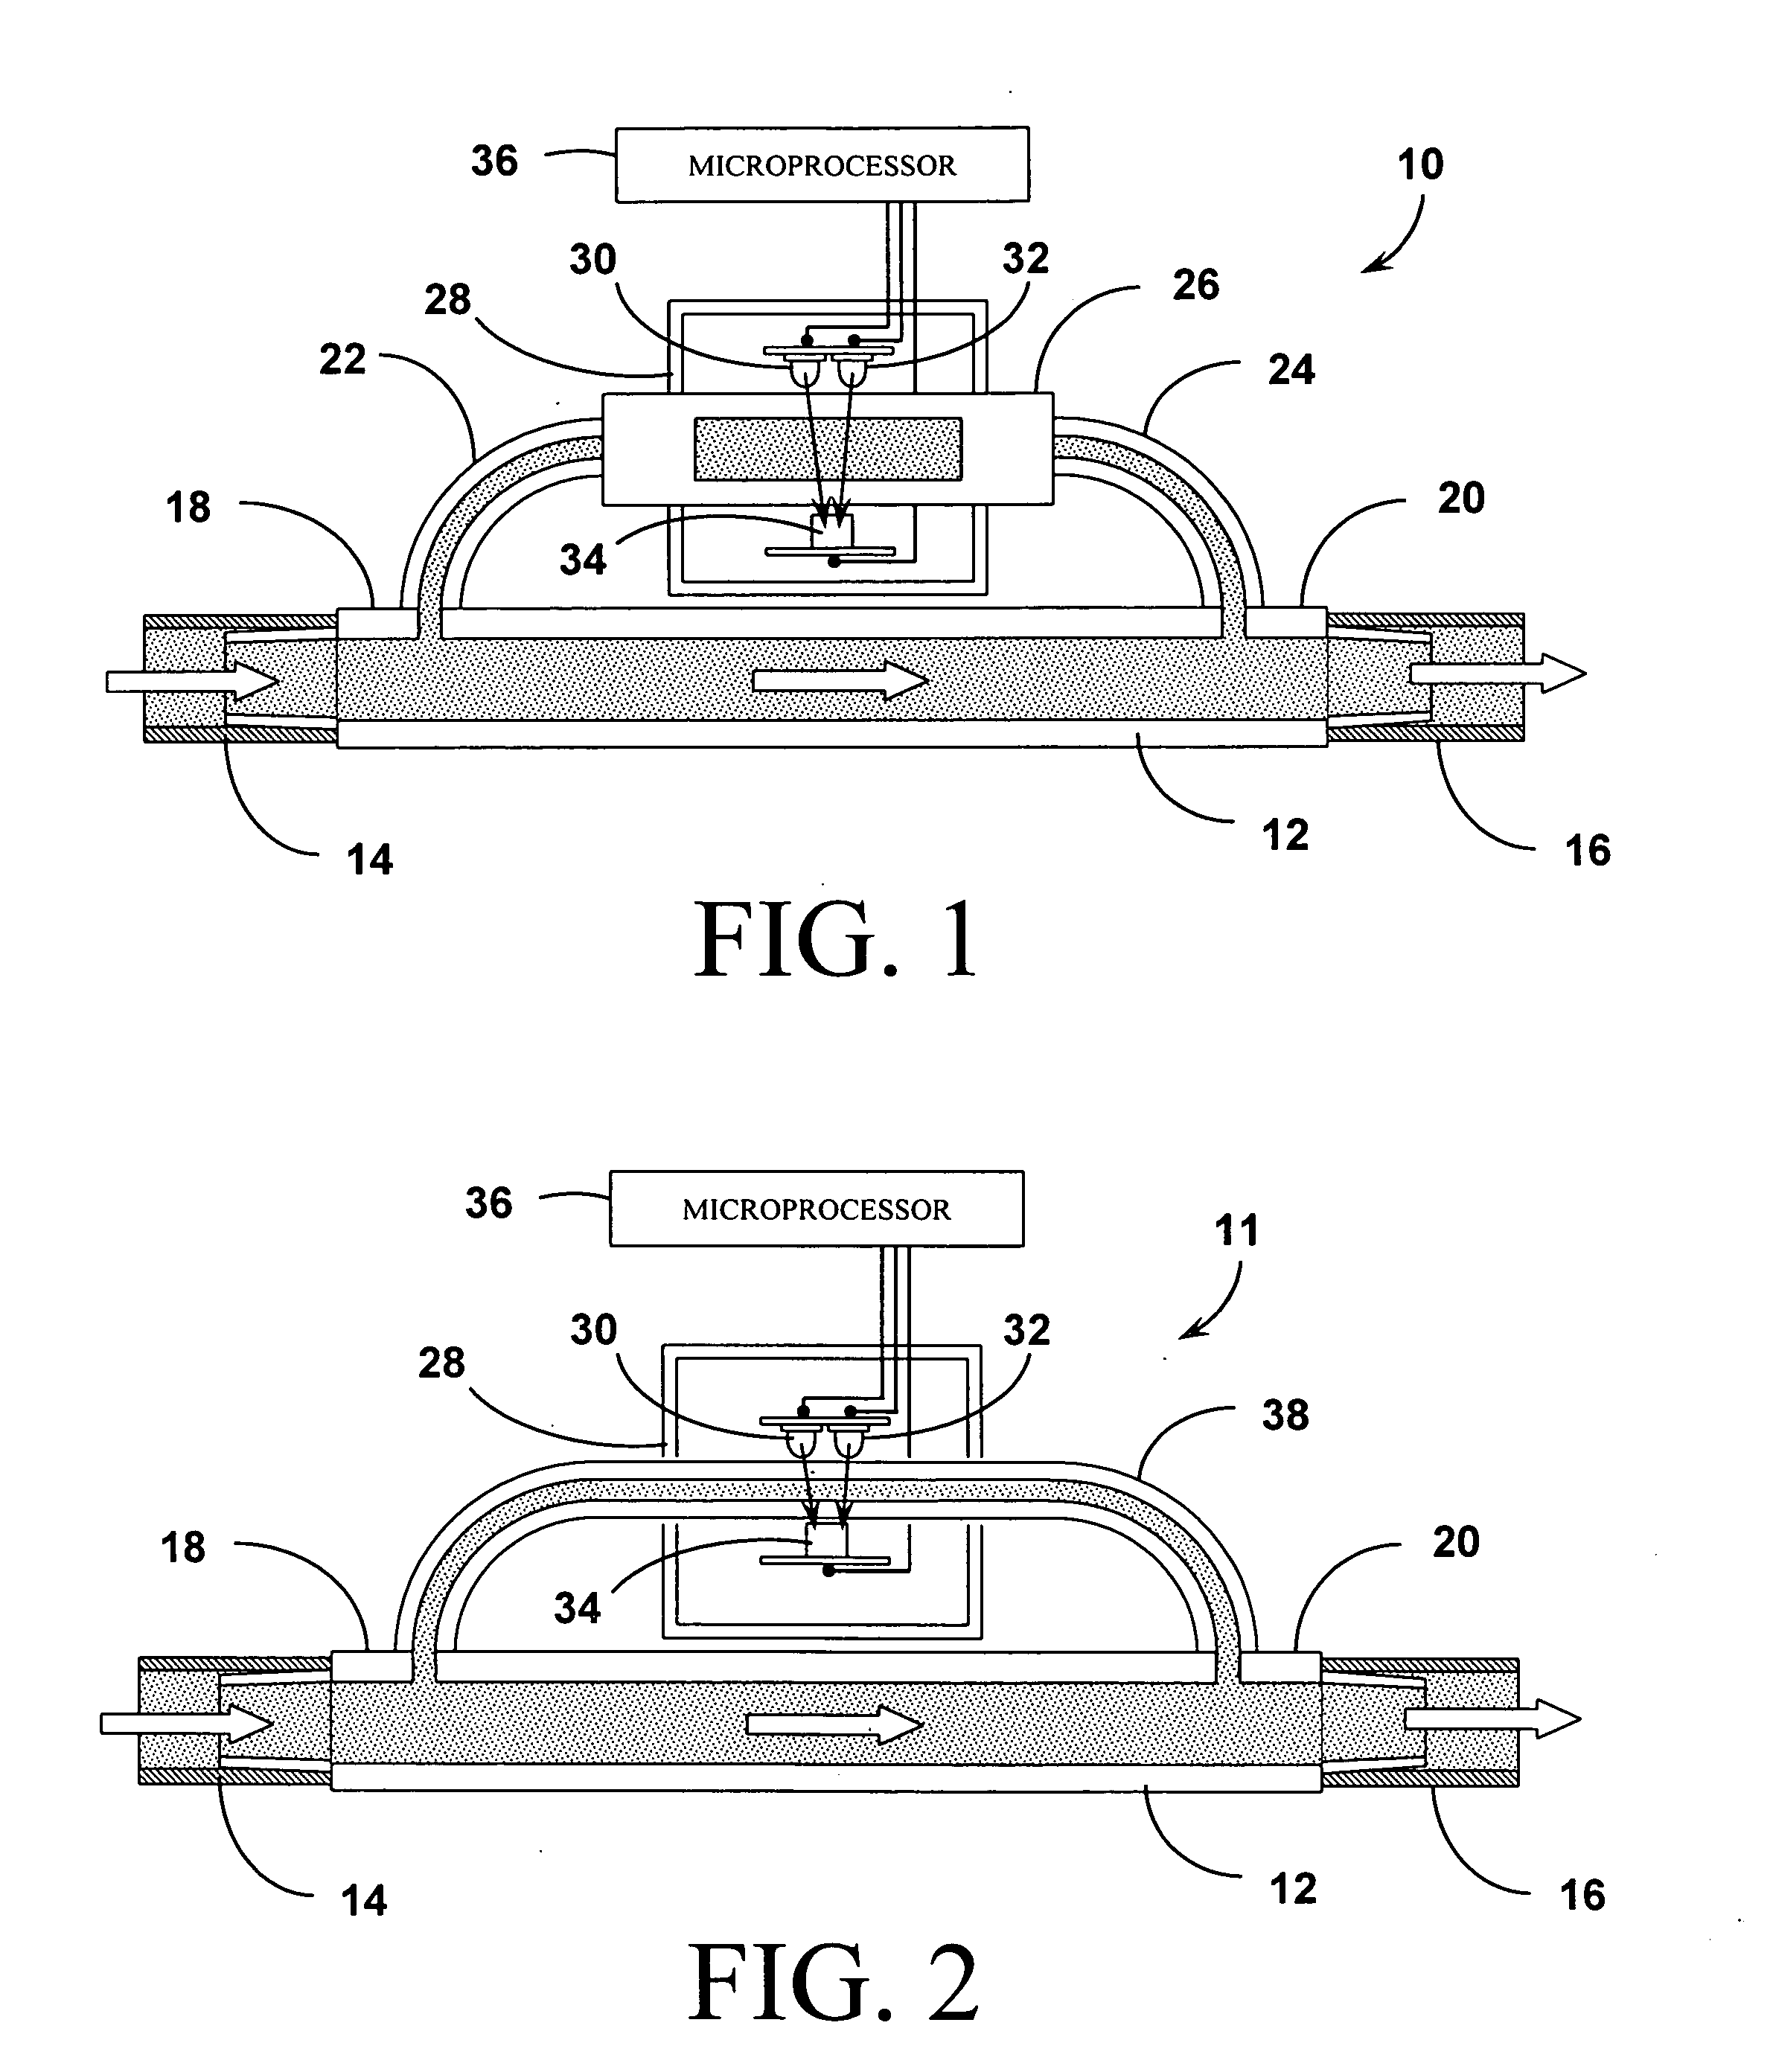 Systems and methods for detection of wound fluid blood and application of phototherapy in conjunction with reduced pressure wound treatment system